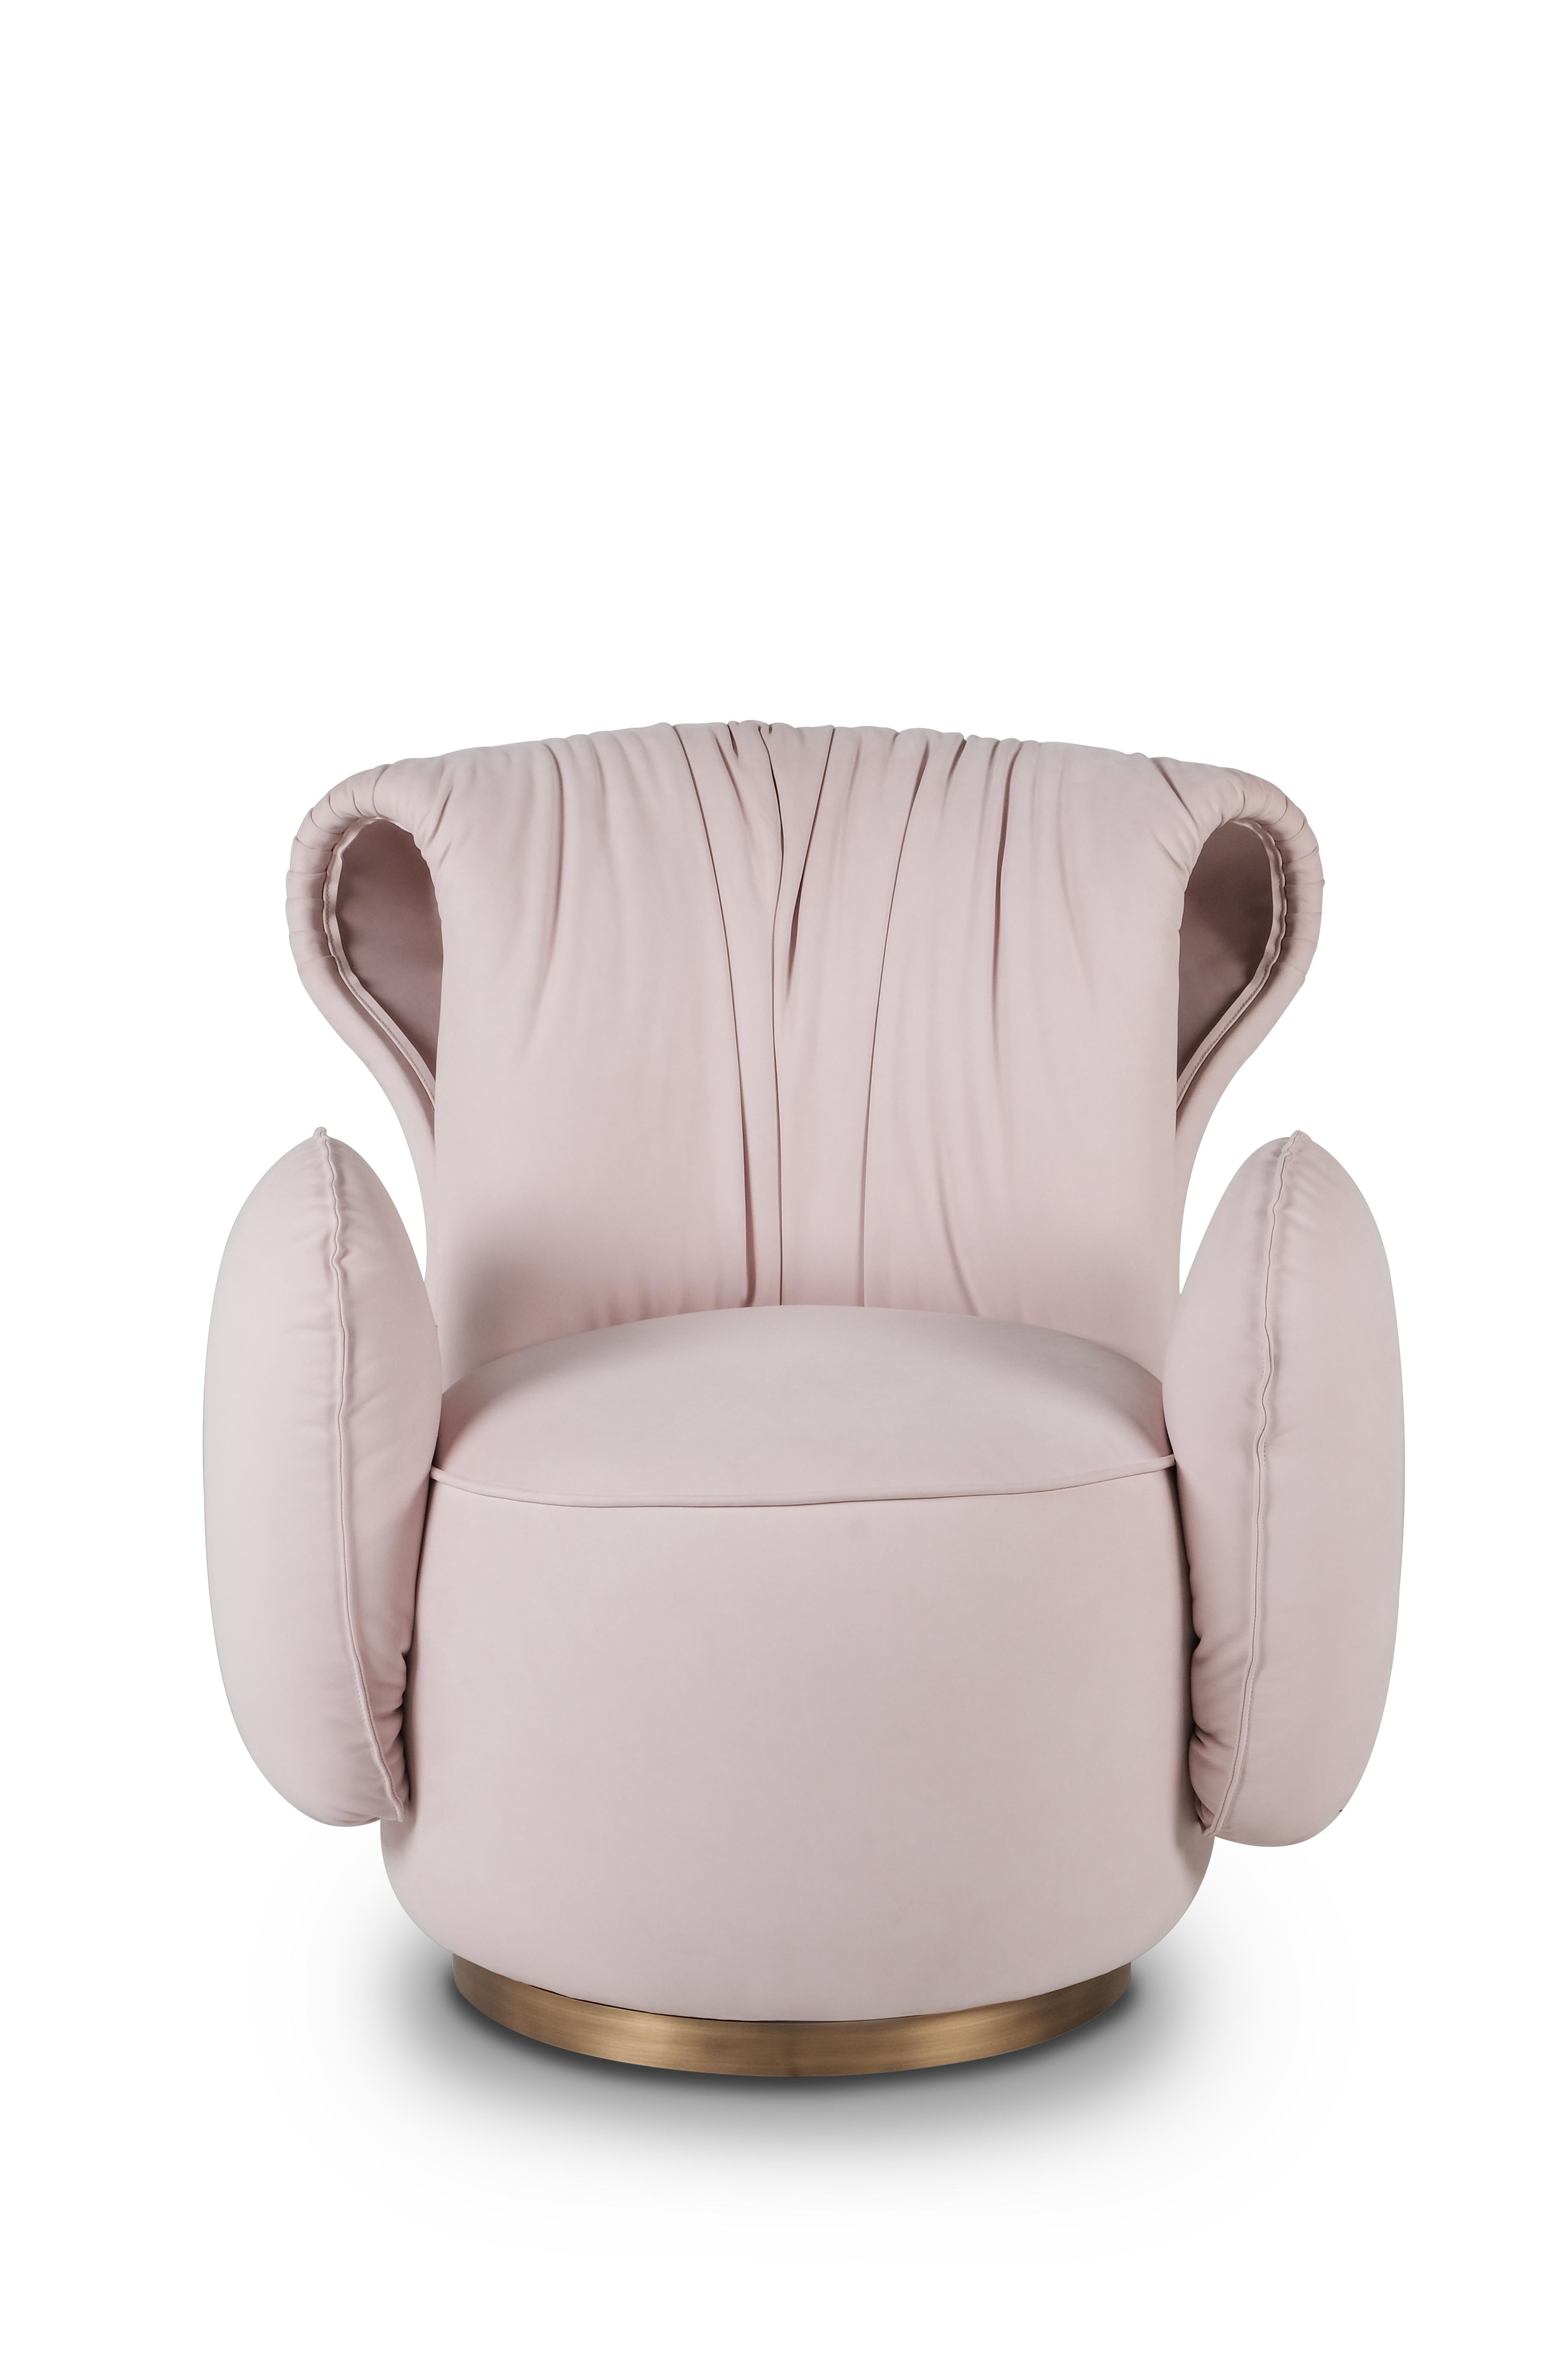 Portuguese Modern Grass Armchair, Pink Nubuck Leather, Handmade in Portugal by Greenapple For Sale